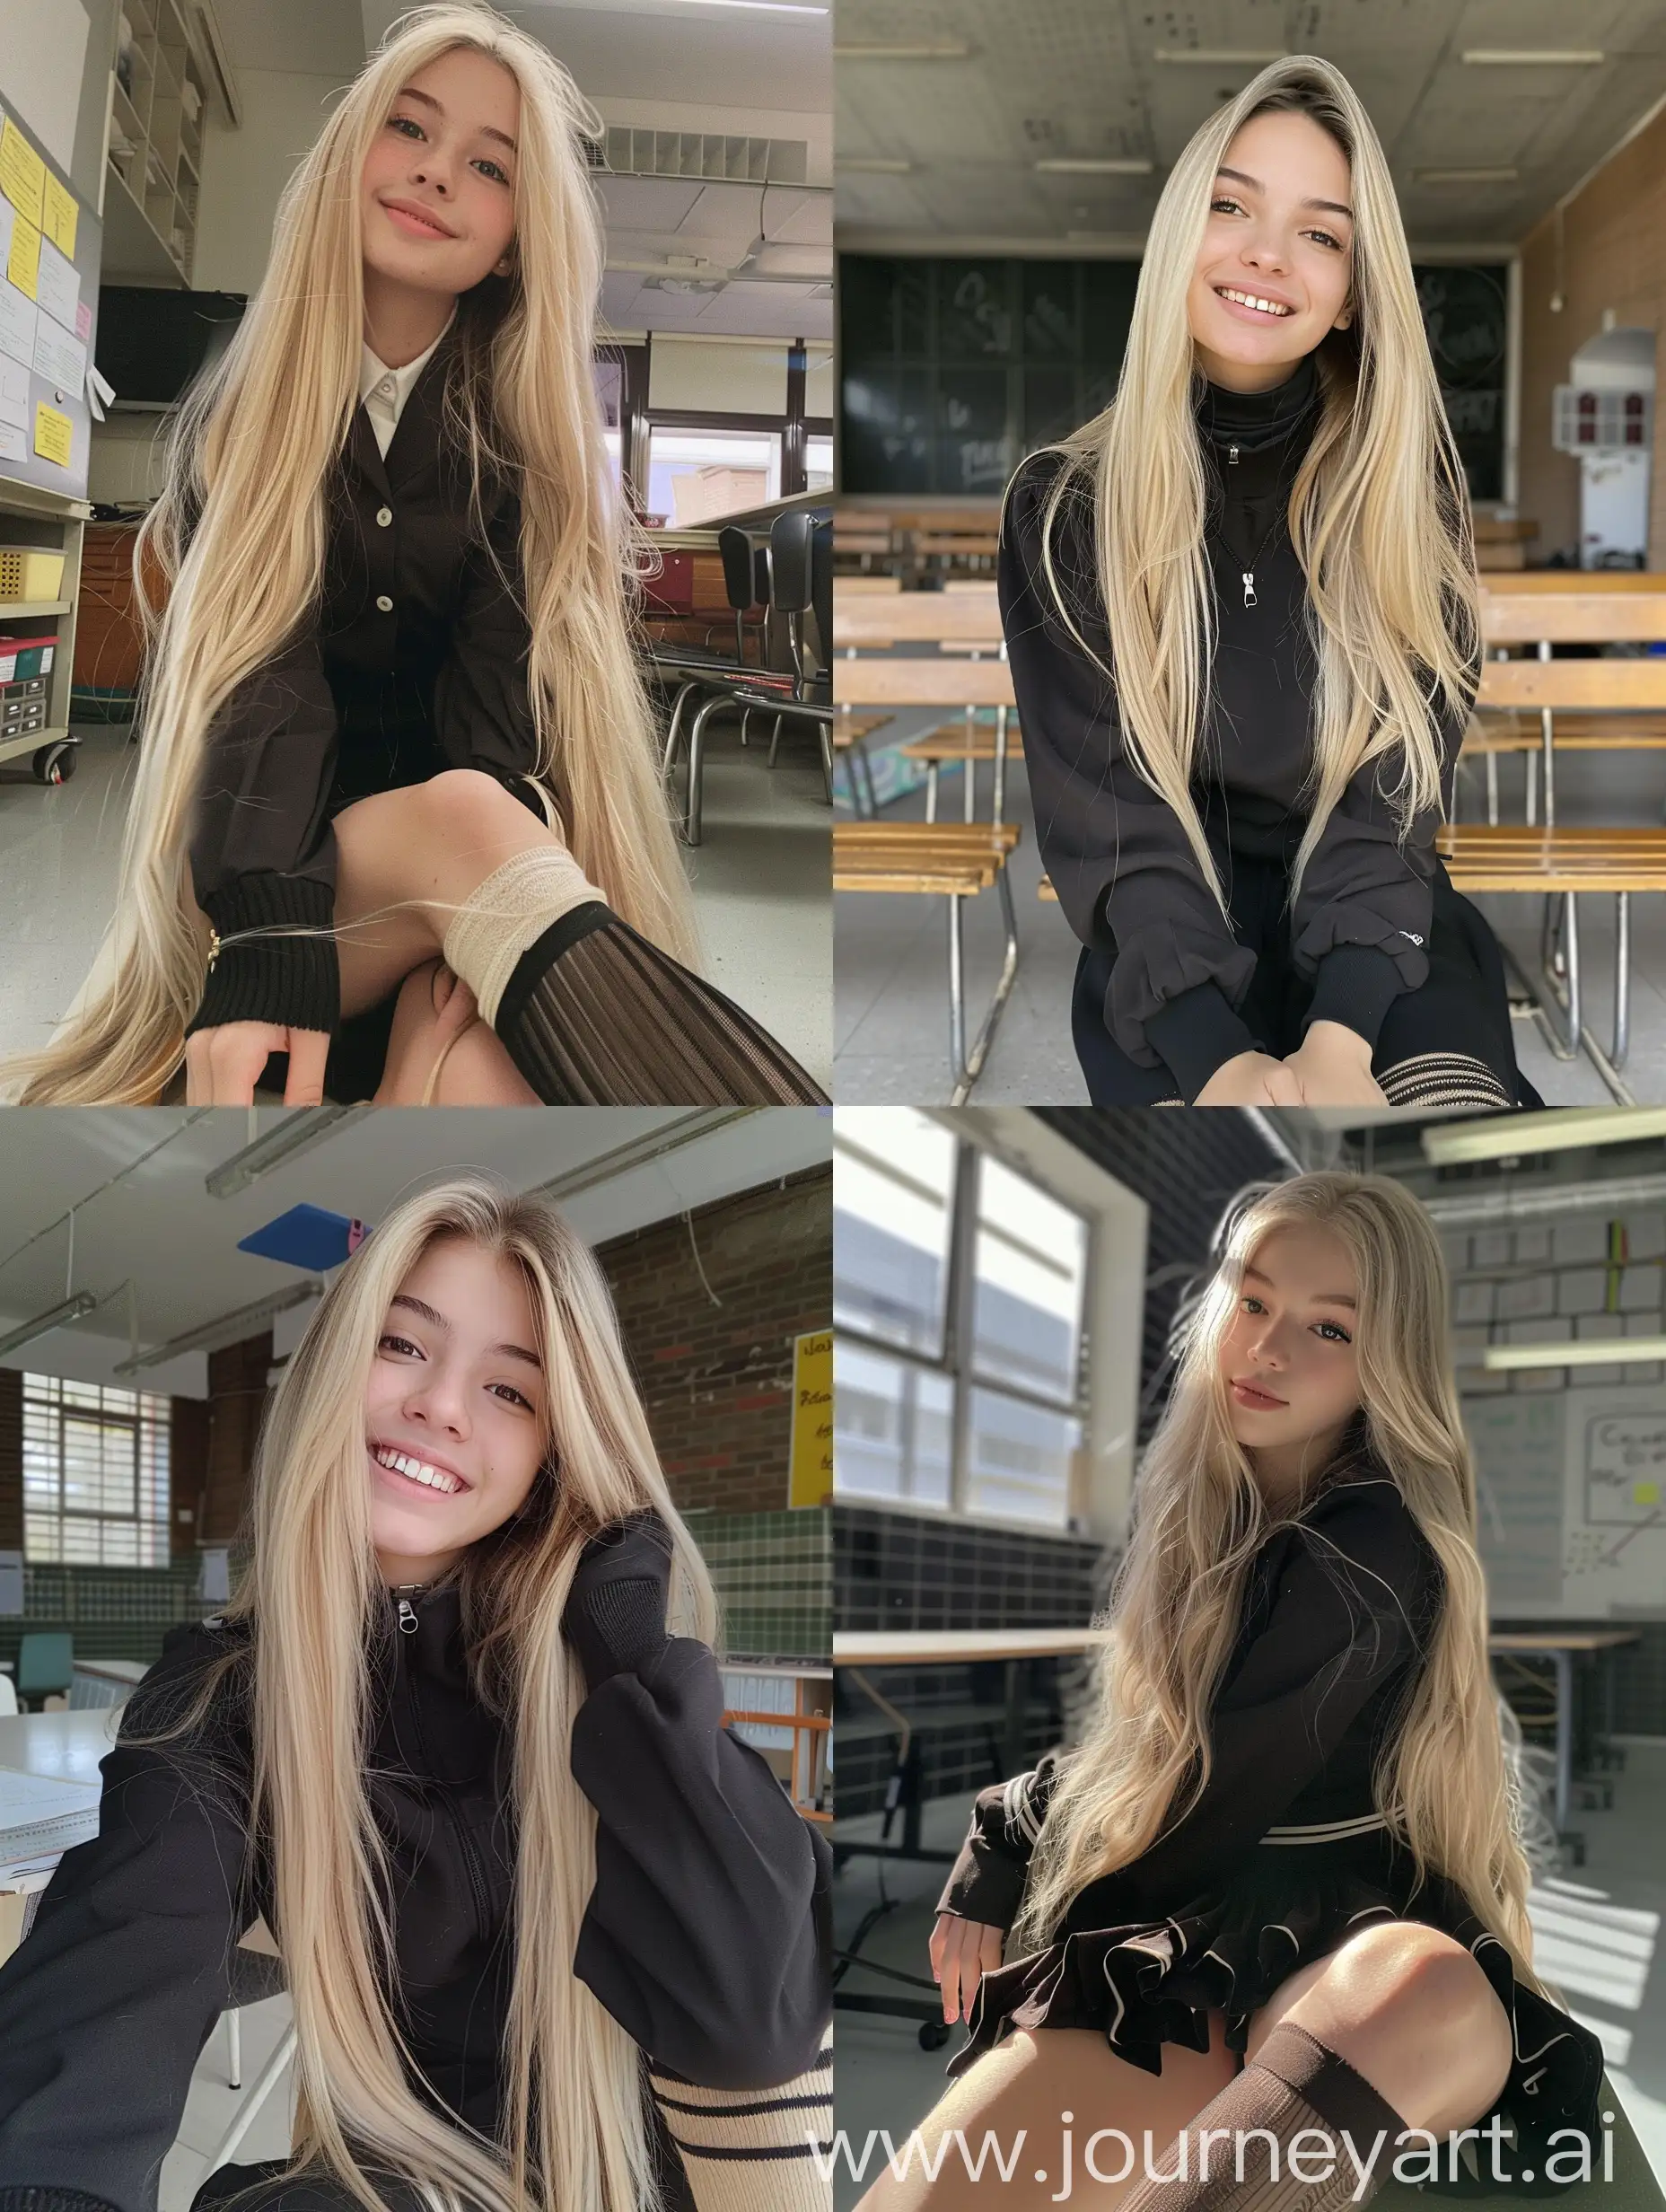 1  girl,    long  blond  hair ,   22  years  old,    influencer,    beauty   ,     in  the  school    ,school black  uniform  ,  makeup,   smiling, chão view,      sitting  on  chair  ,    socks  and  boots,    no  effect,     selfie   , iphone  selfie,      no  filters ,   iphone  photo    natural